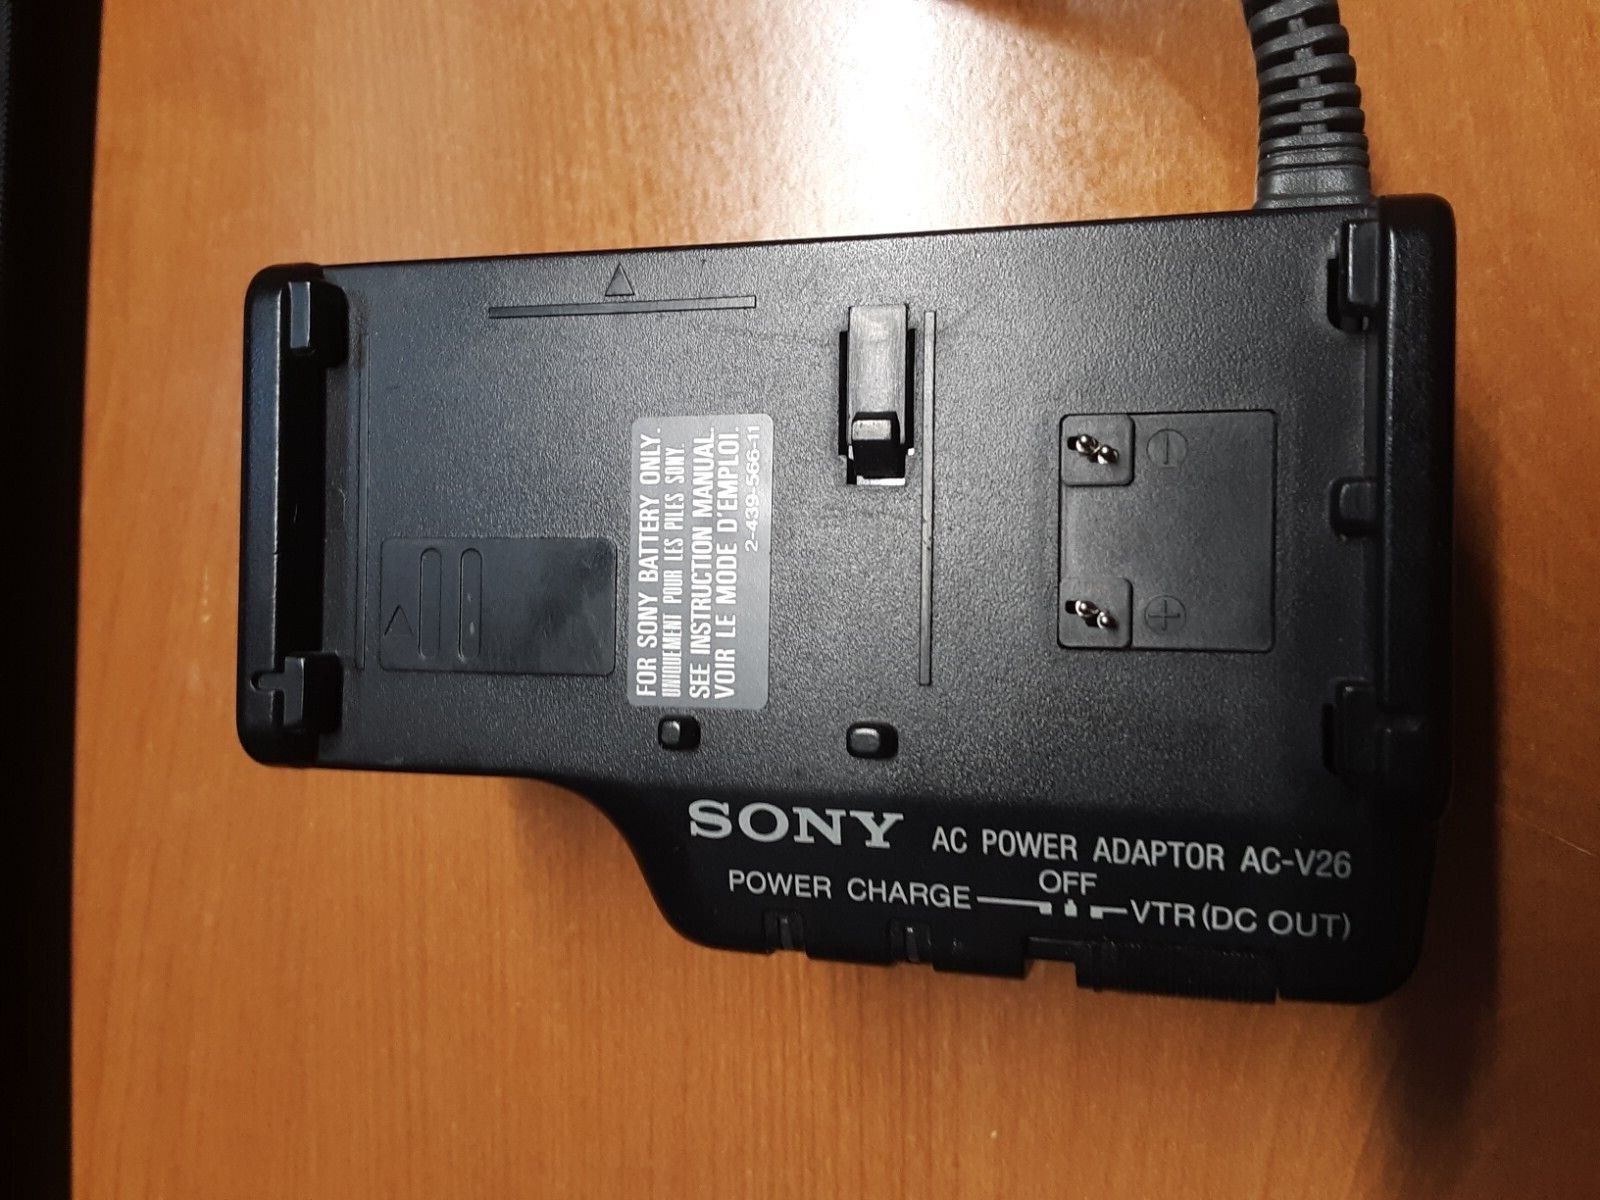 Sony Camcorder Part 200310 Ac-v26 2-439-782-21 Battery Charger